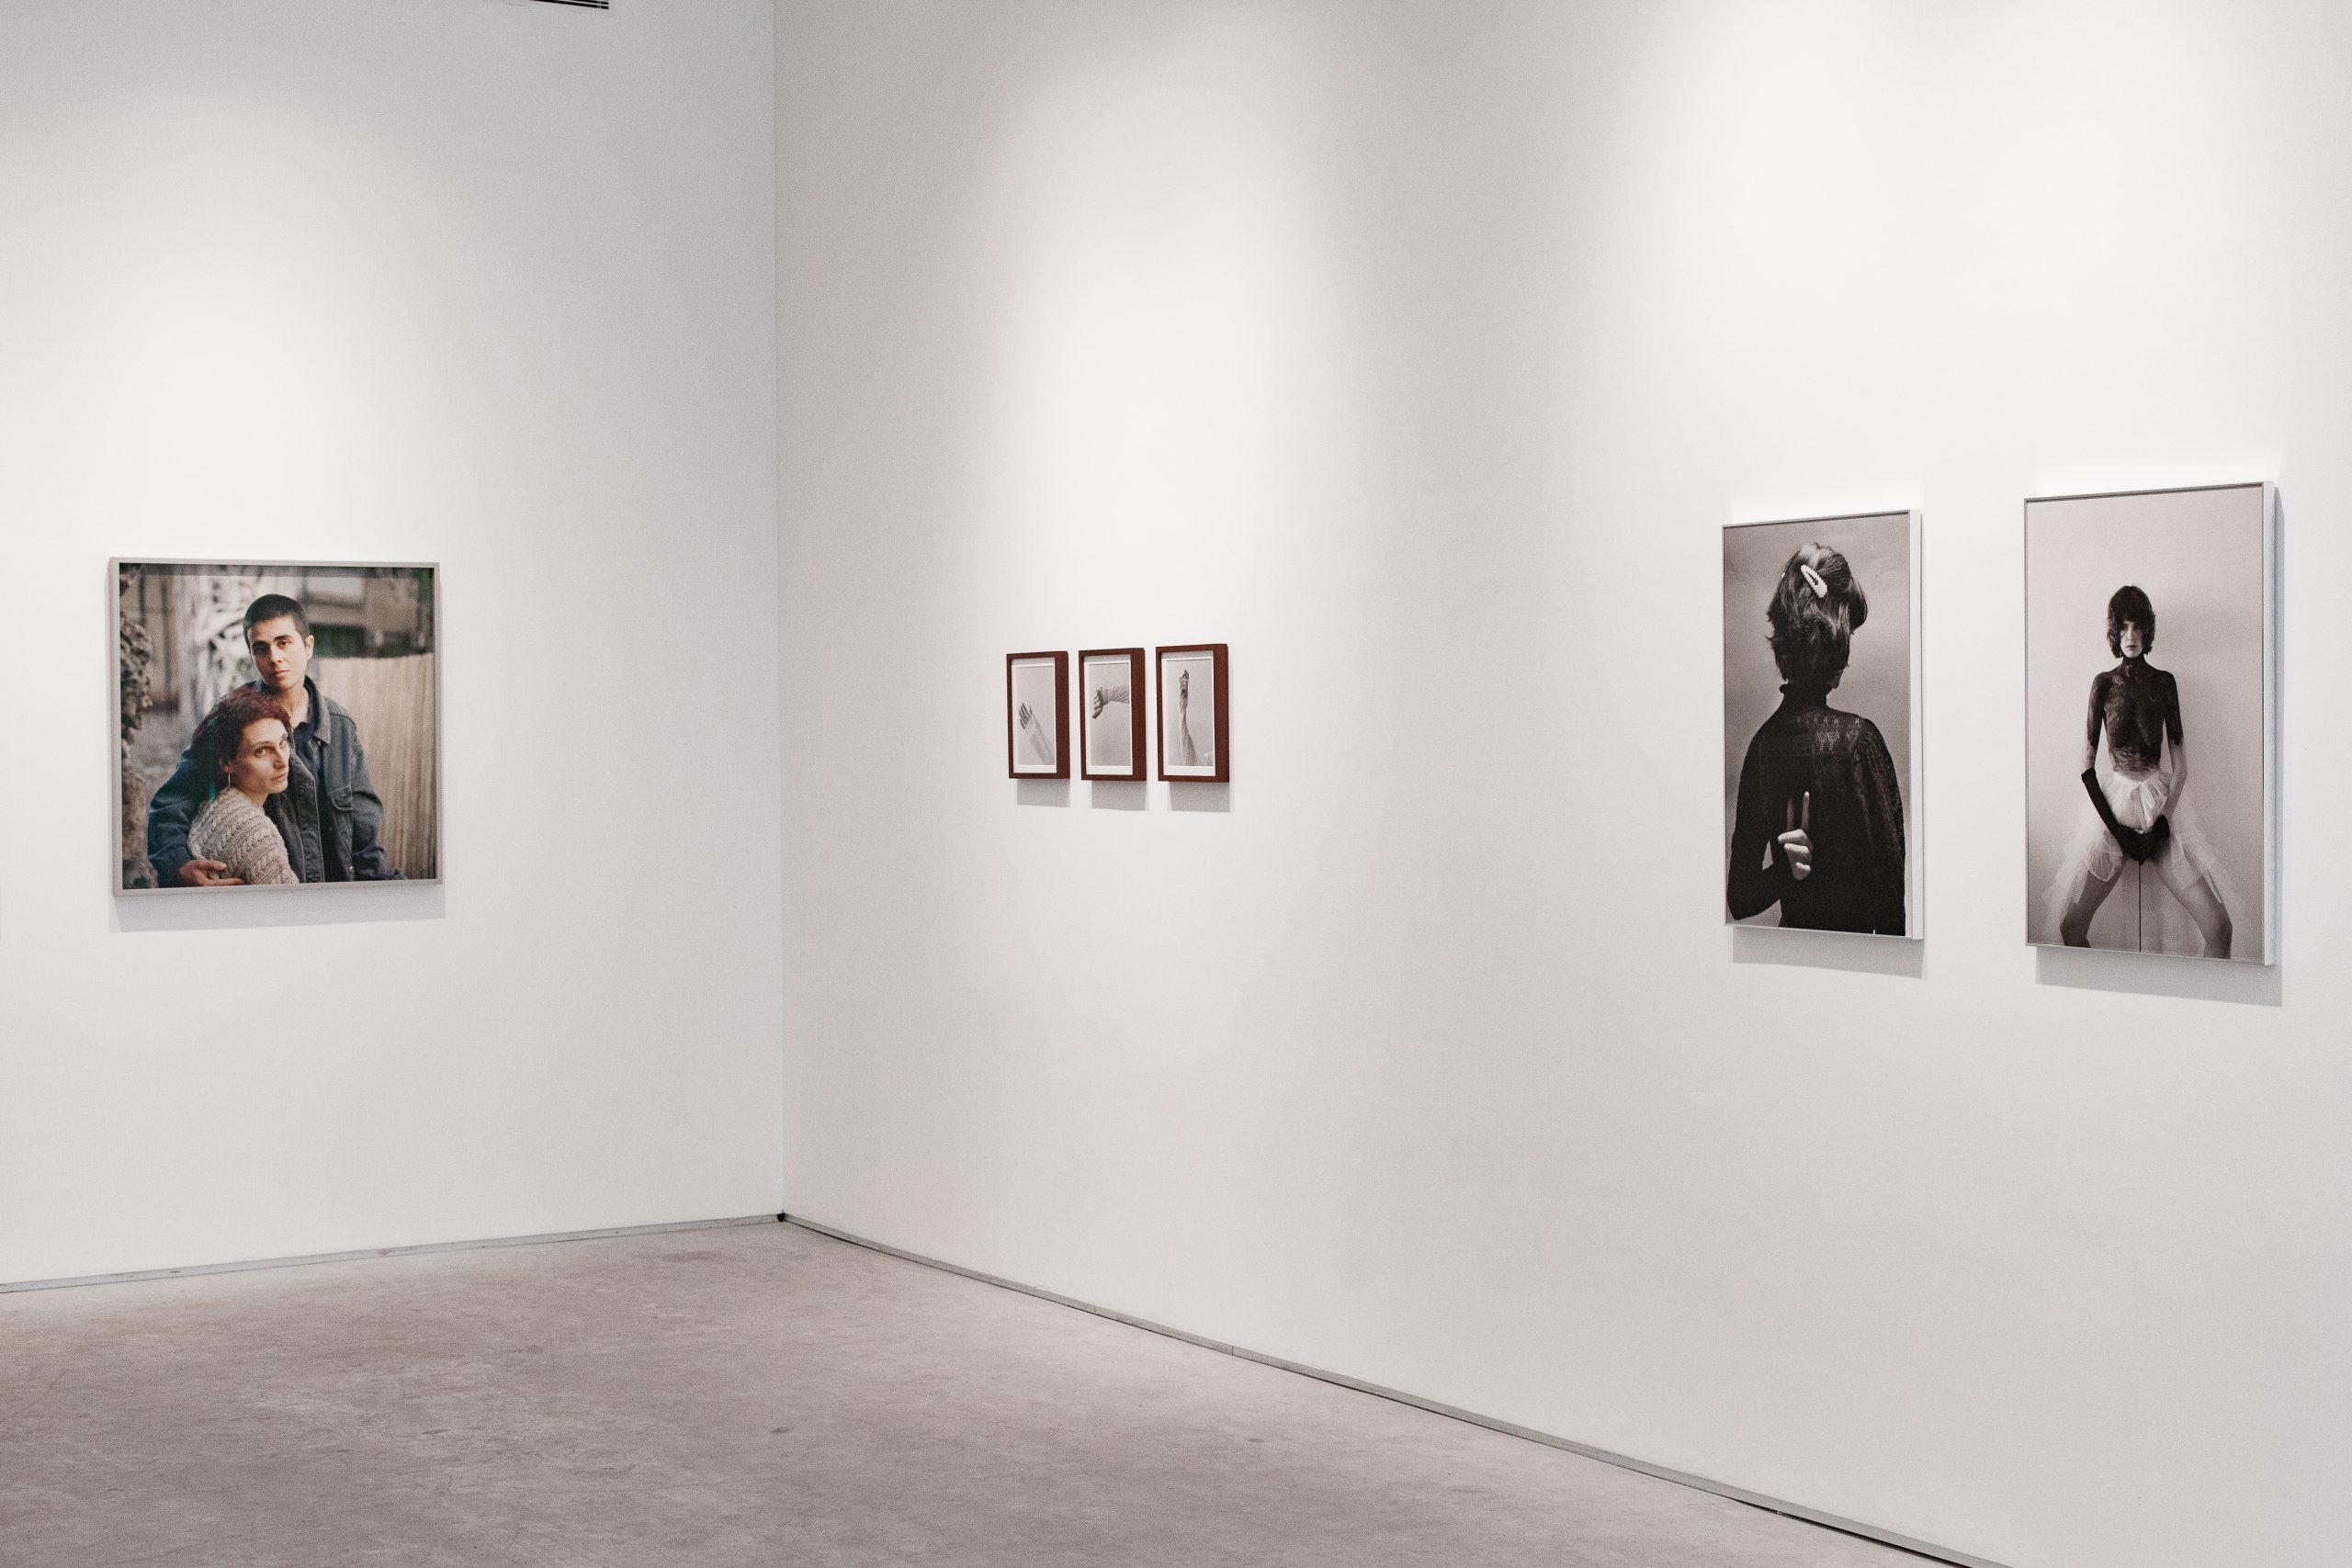 "Body Of Photography", Group show, Installation view at Braverman Gallery, Tel Aviv. Photo by Eden Zornitser